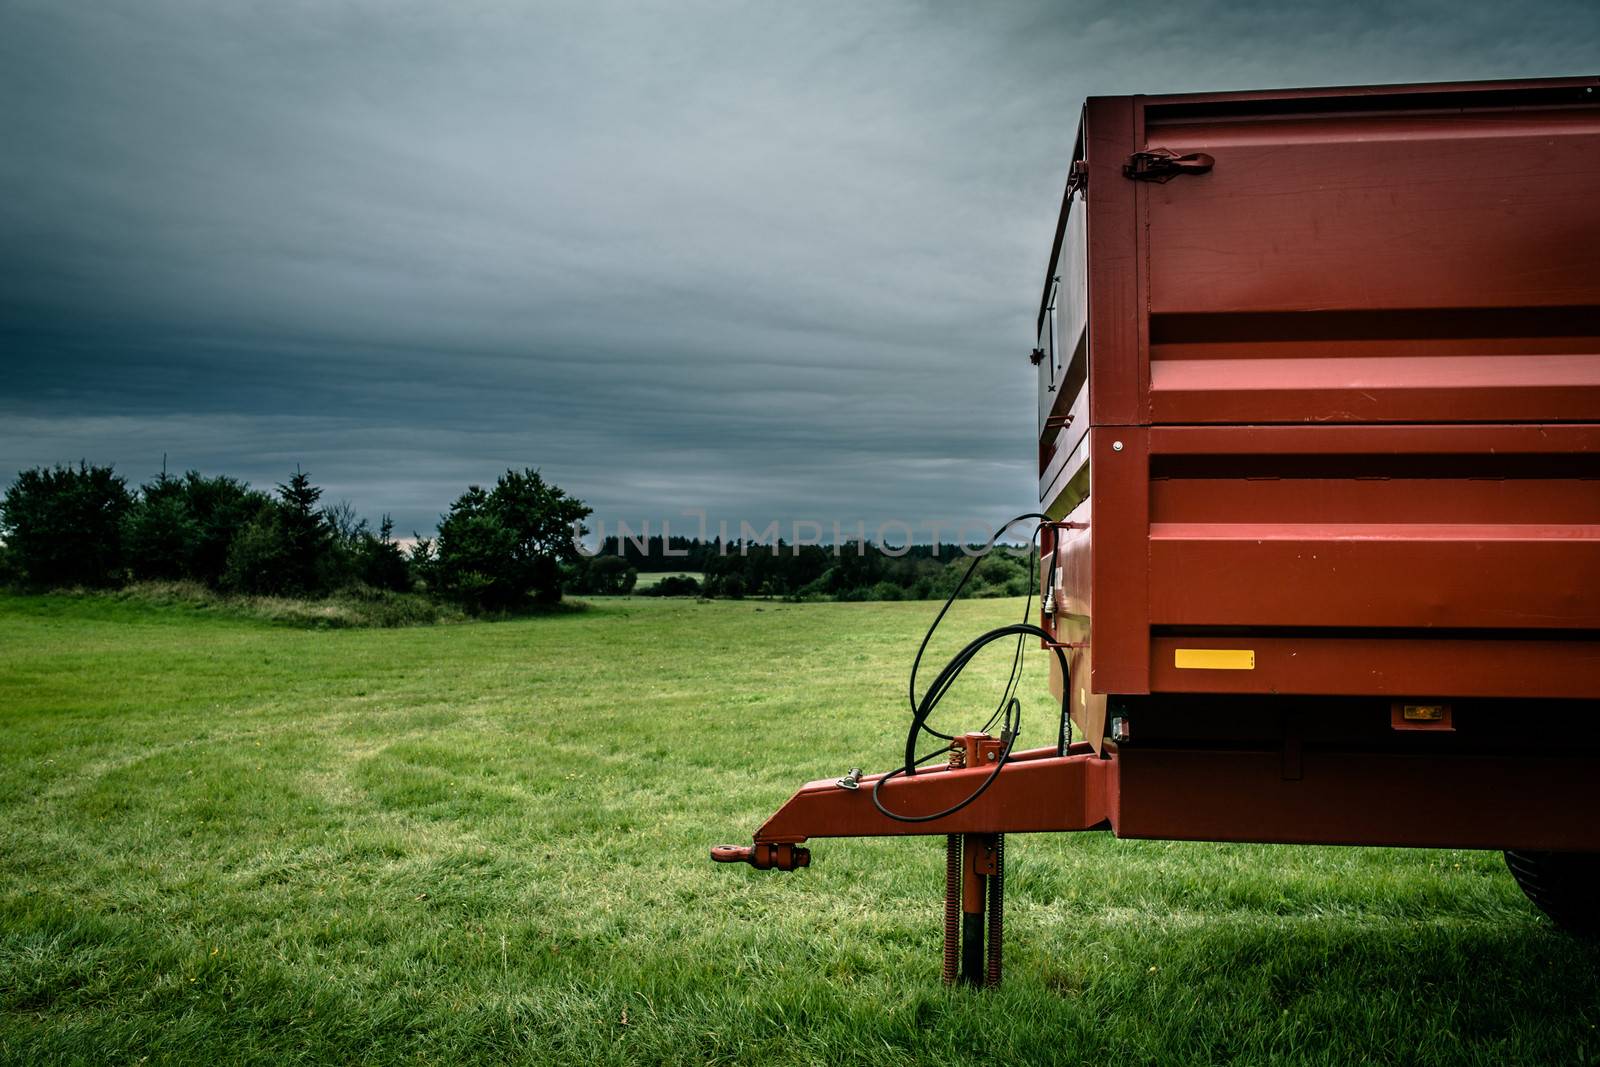 Industrial machine on grass and cloudy weather